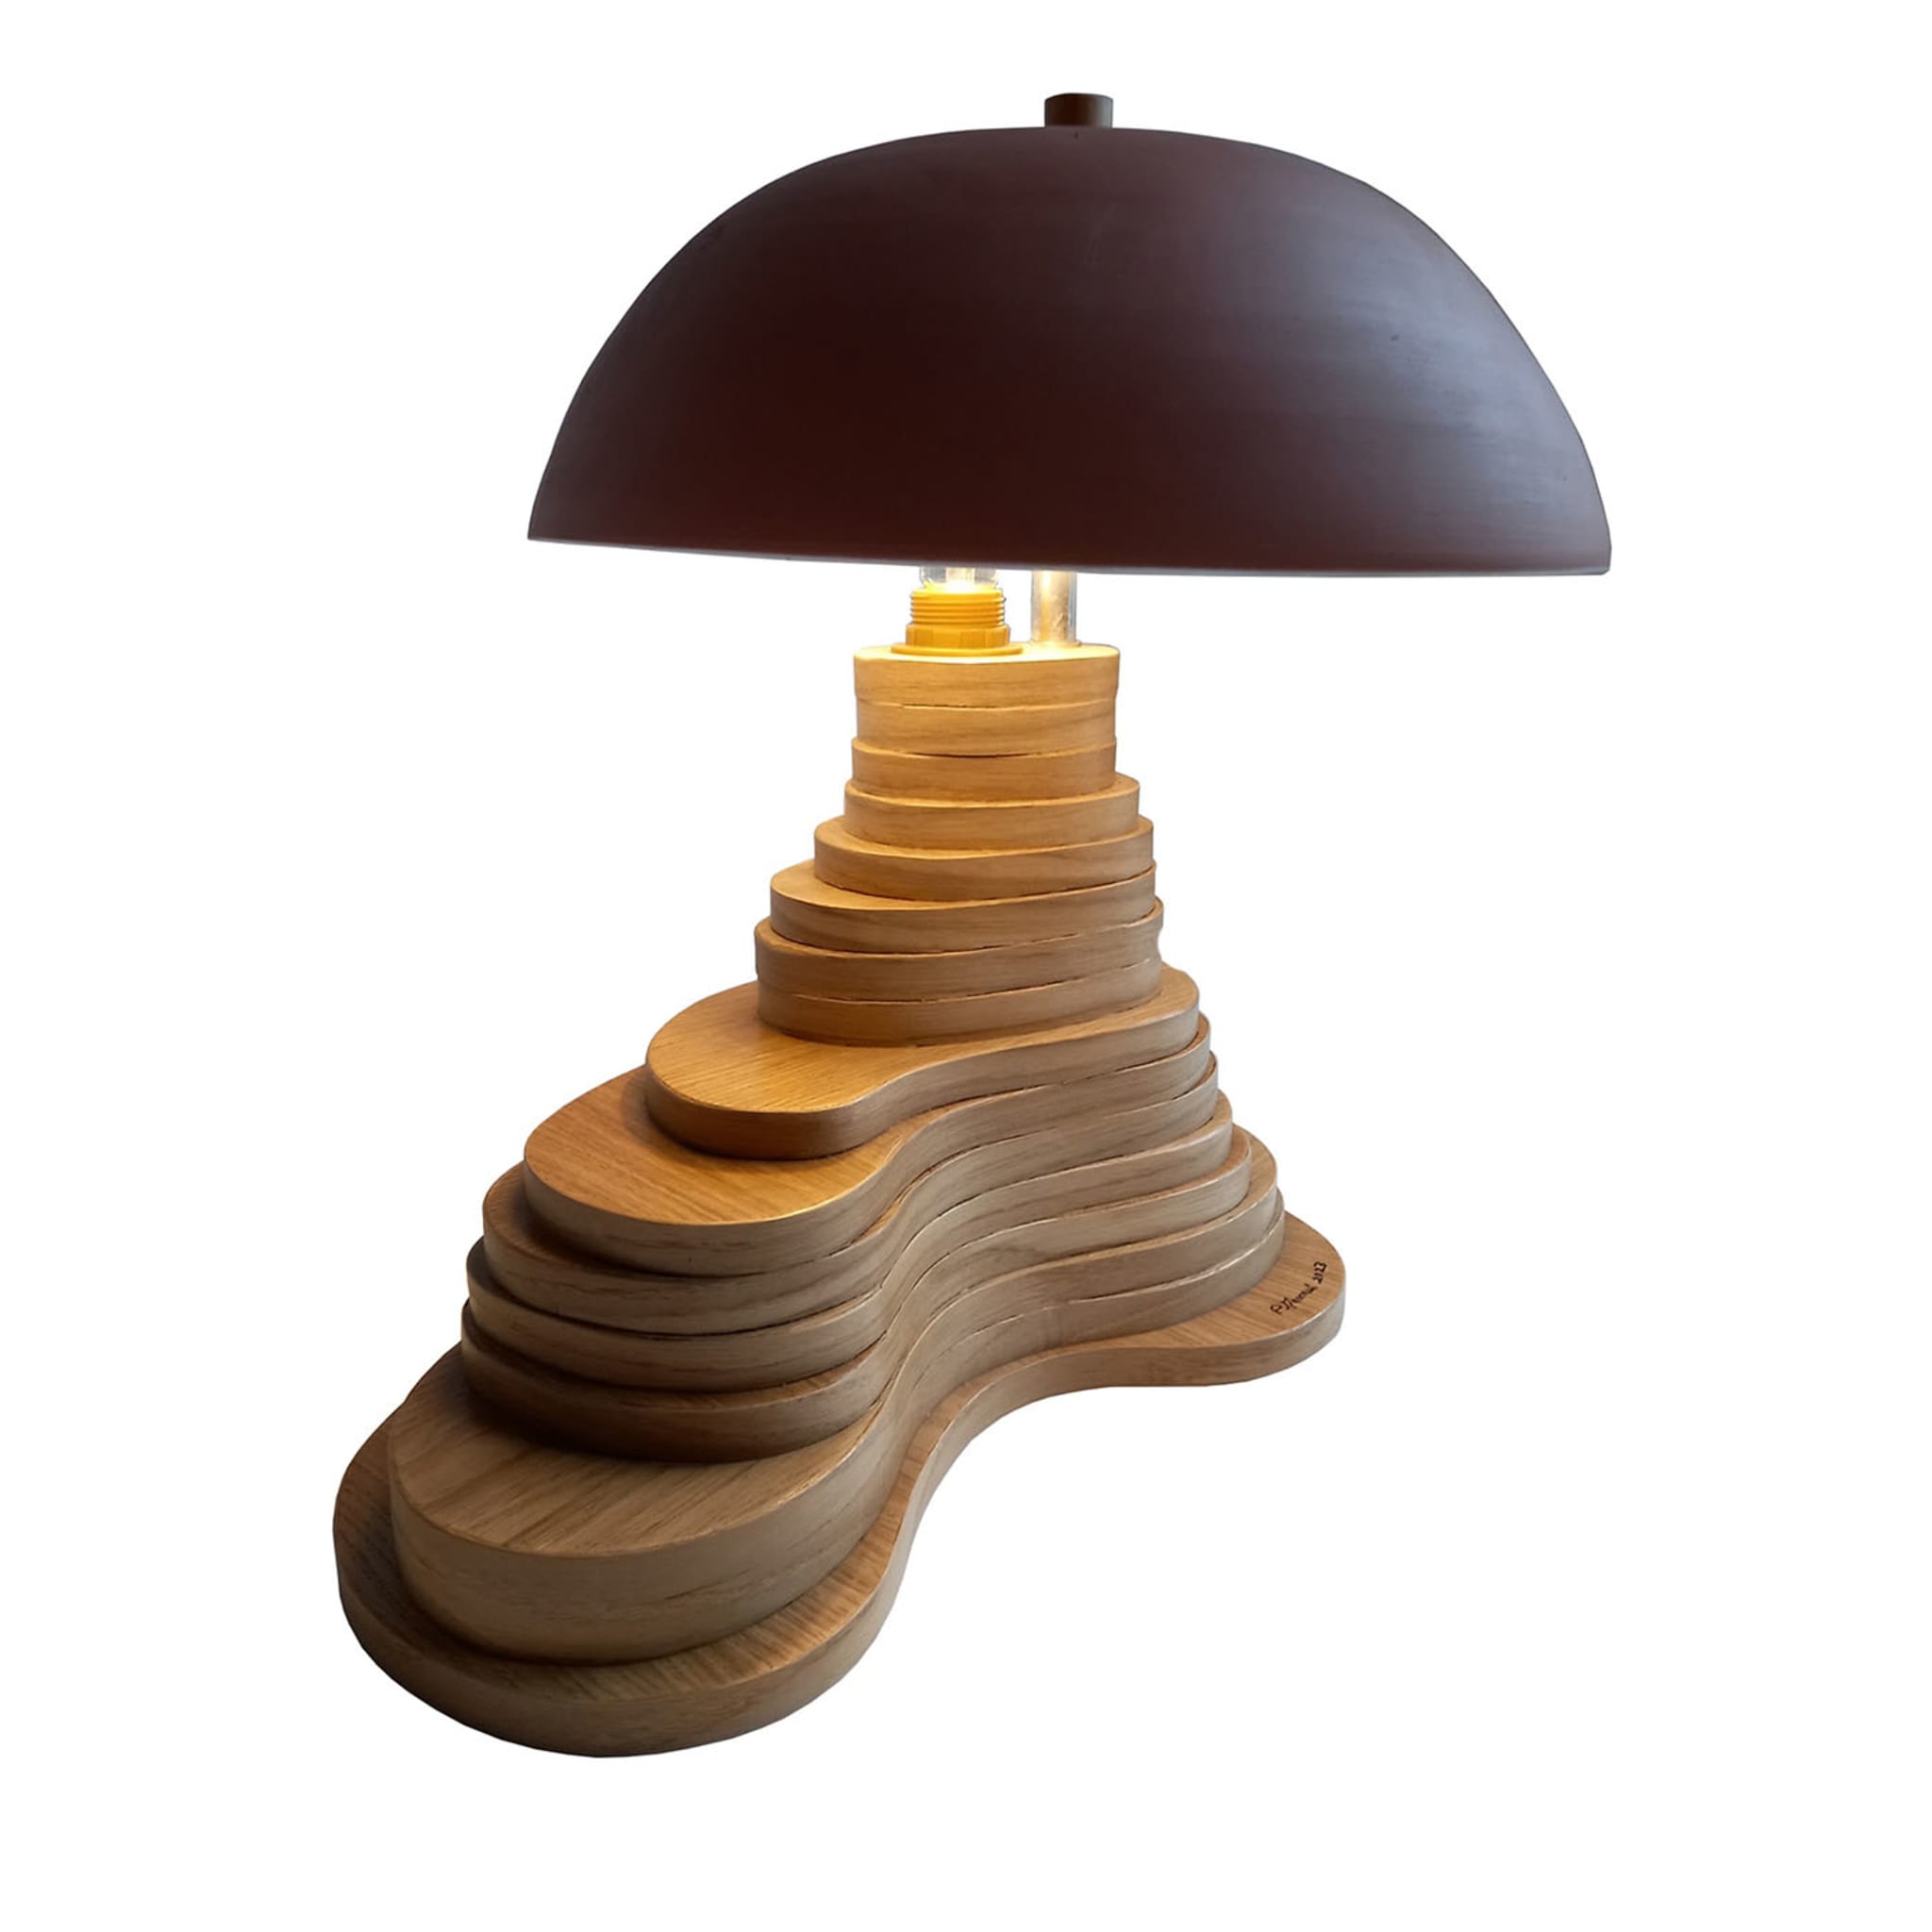 Fungus Table Lamp by Pietro Meccani - Main view